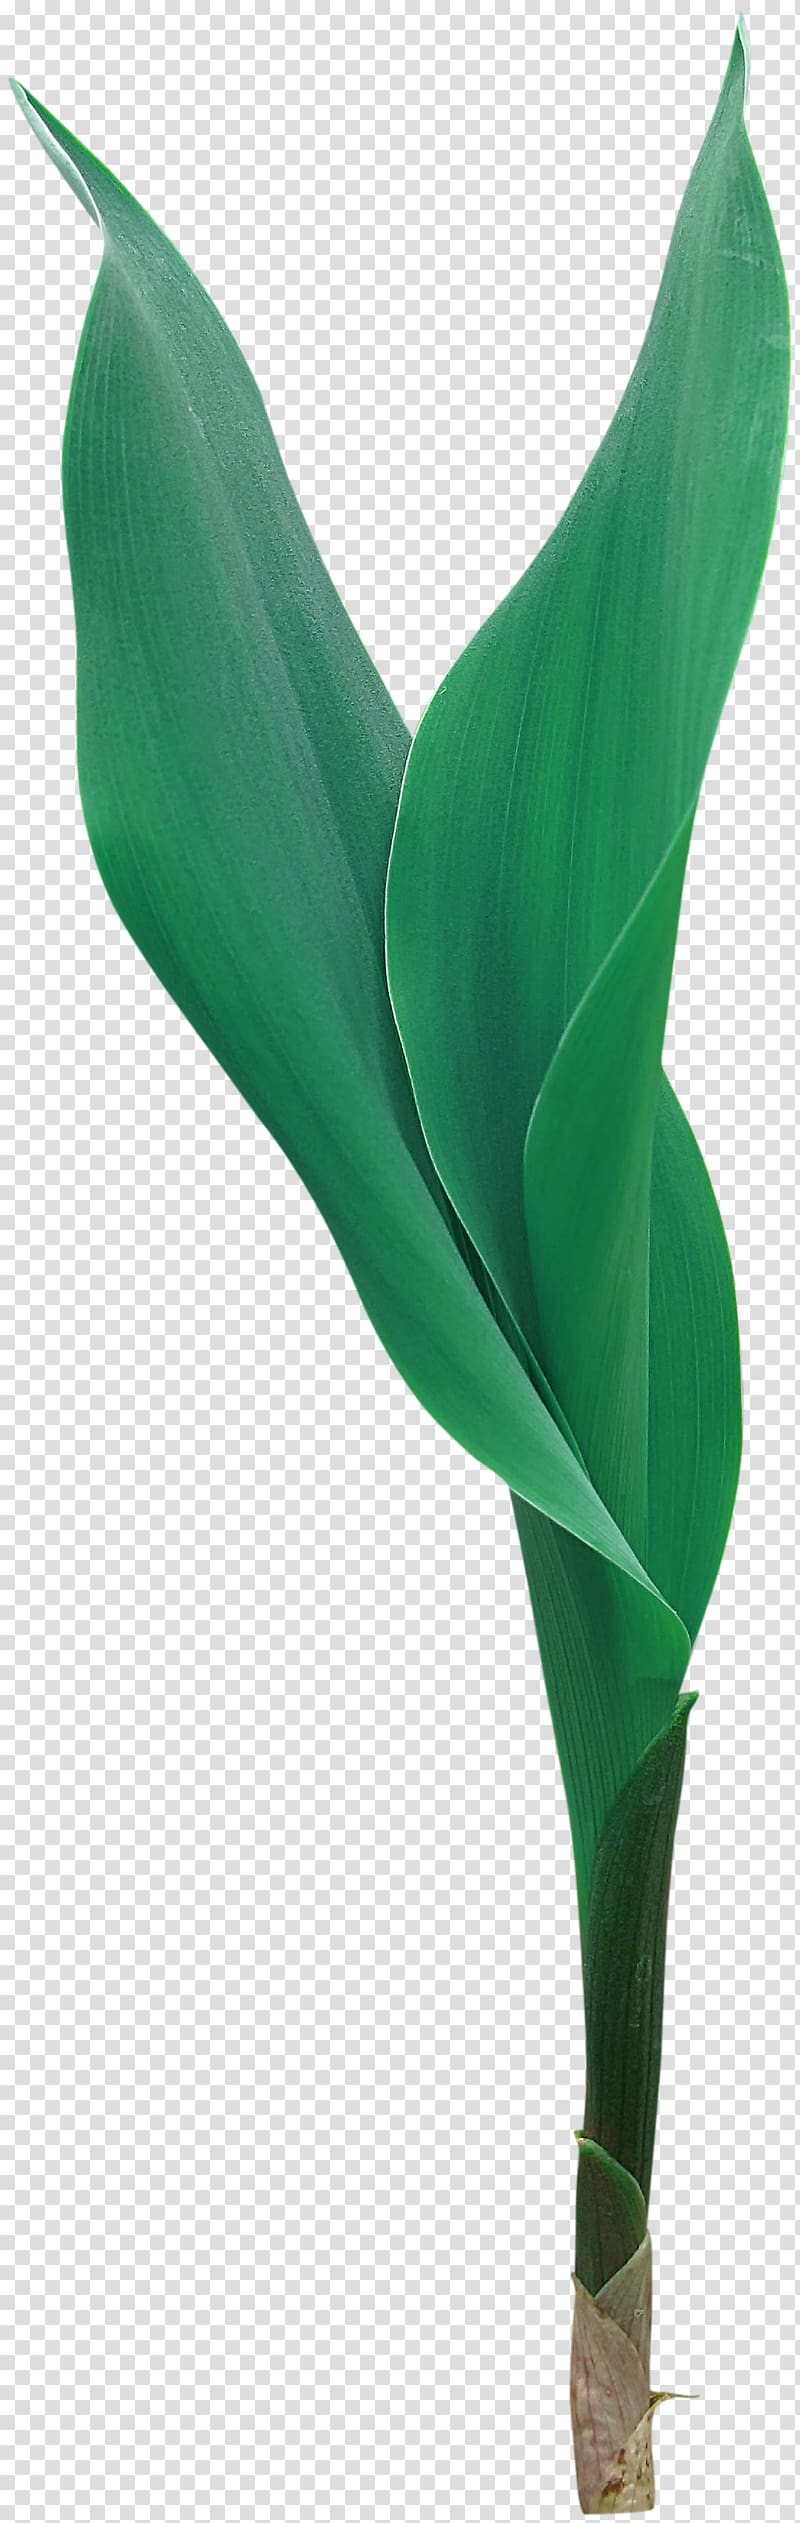 Arum Lilies Flowering plant Leaf, green leaves transparent background PNG clipart